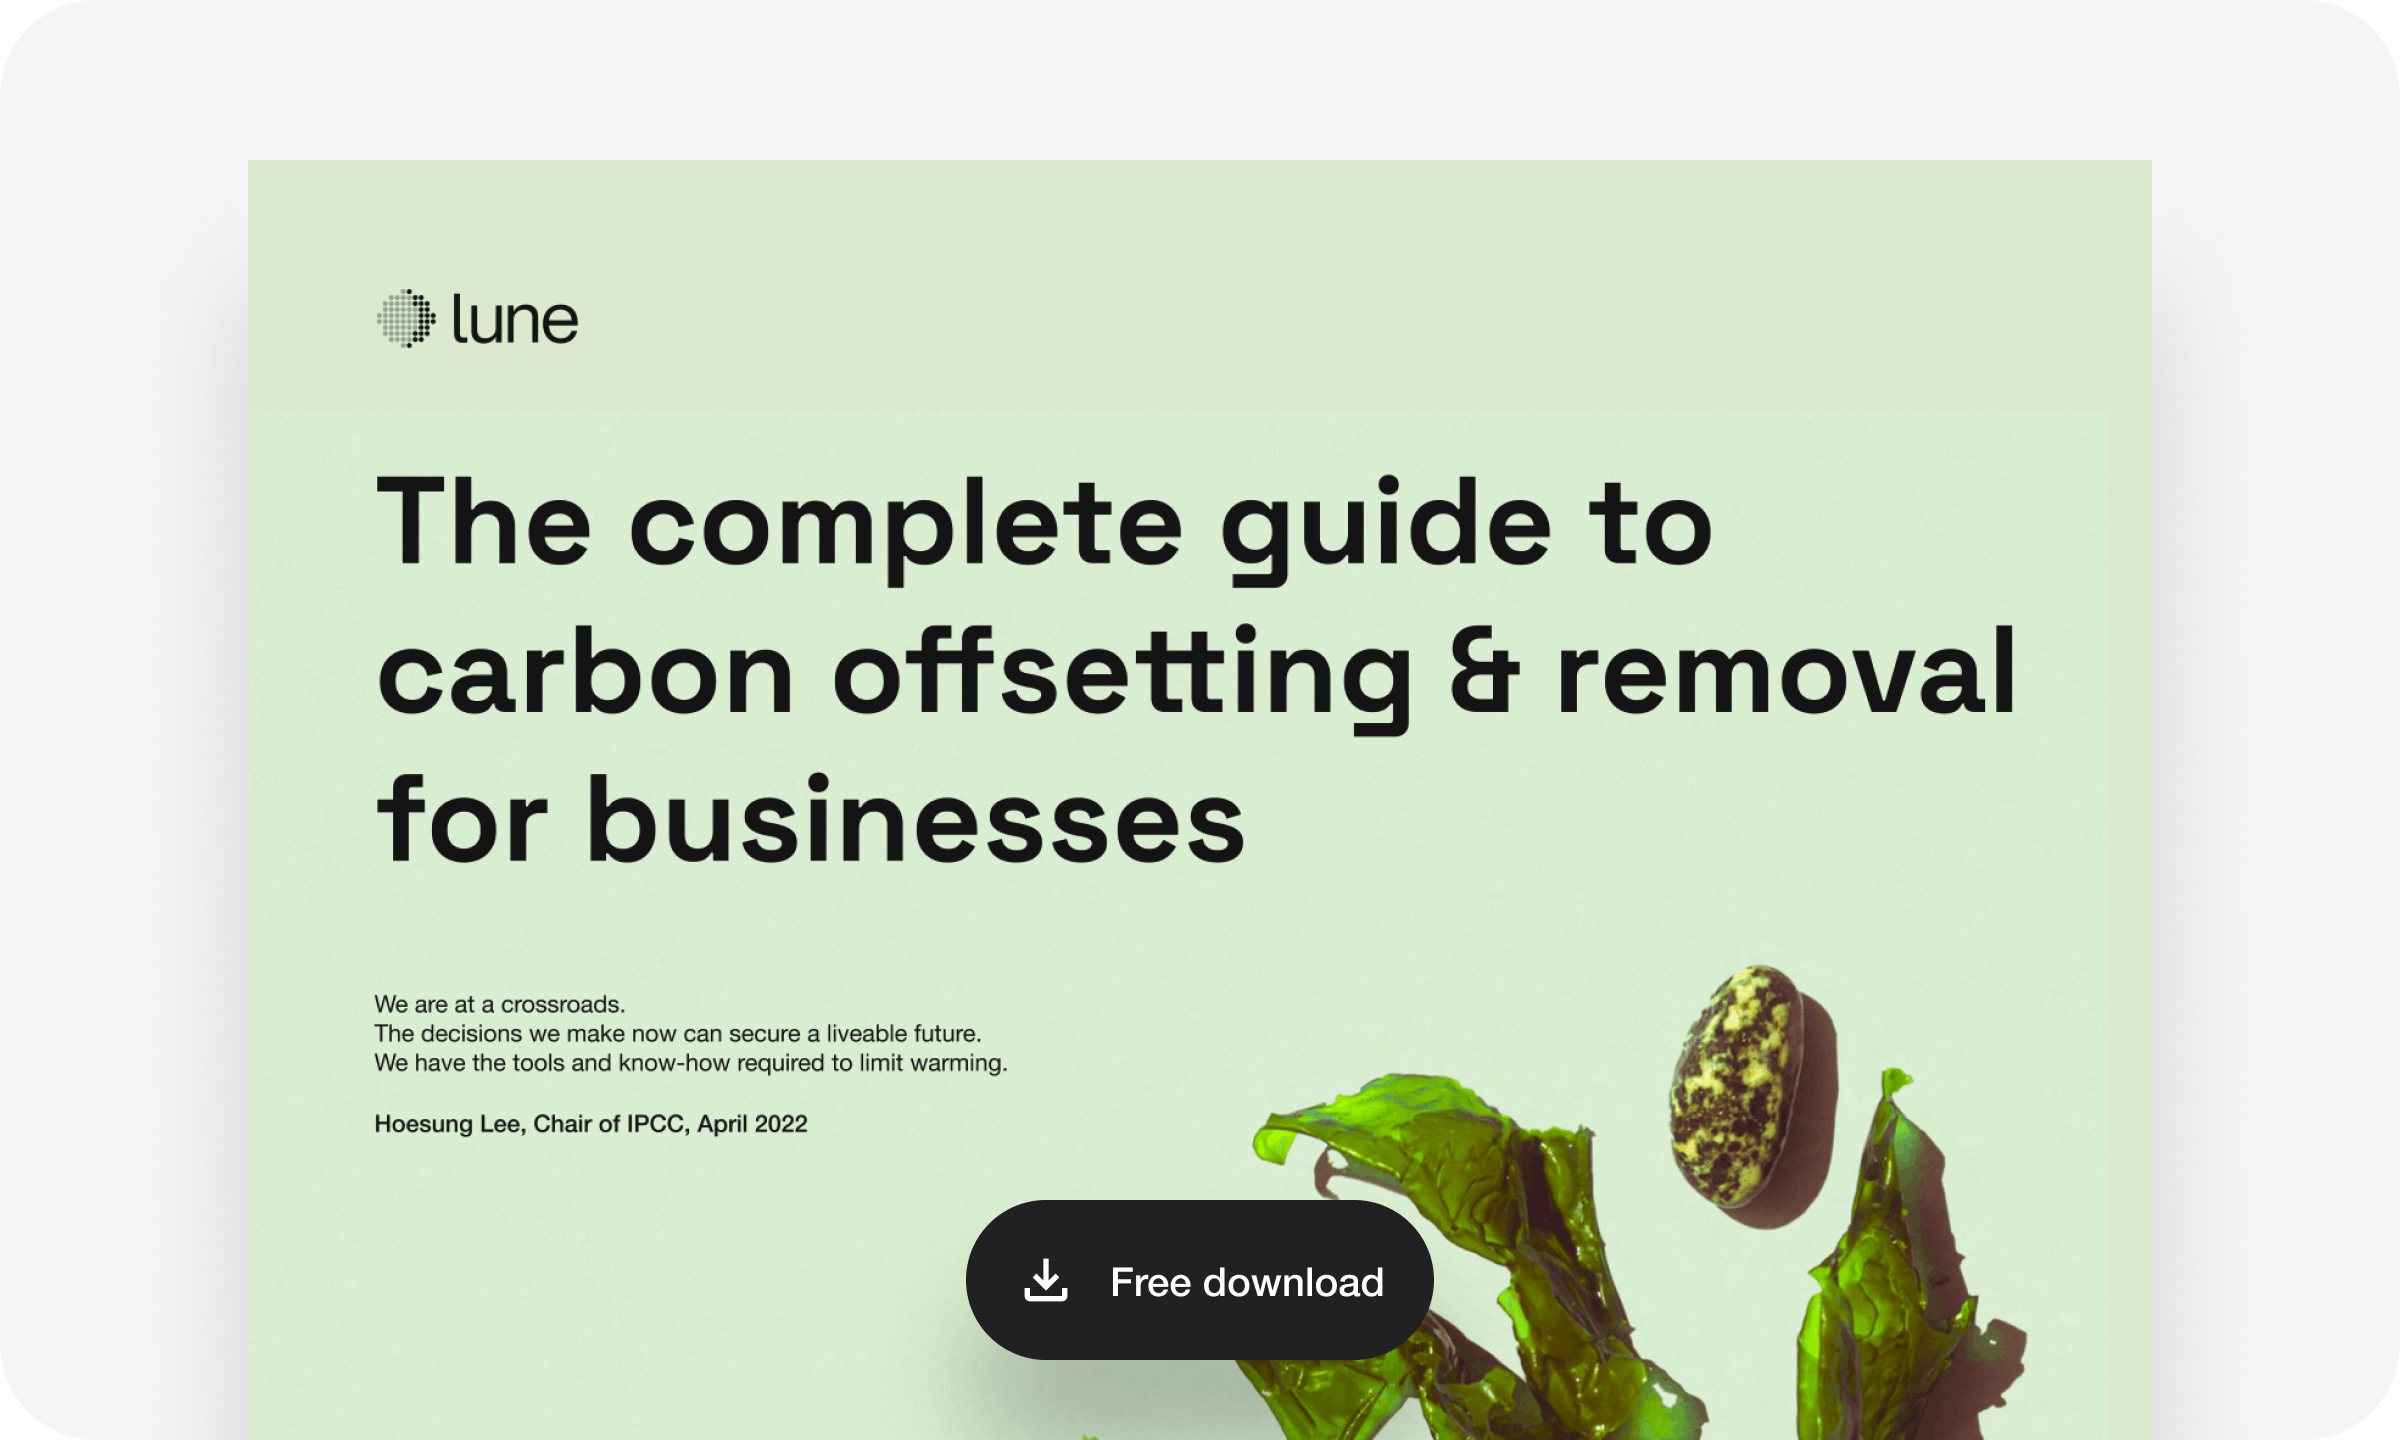 The complete guide to carbon offsetting and removal for businesses. Free download.